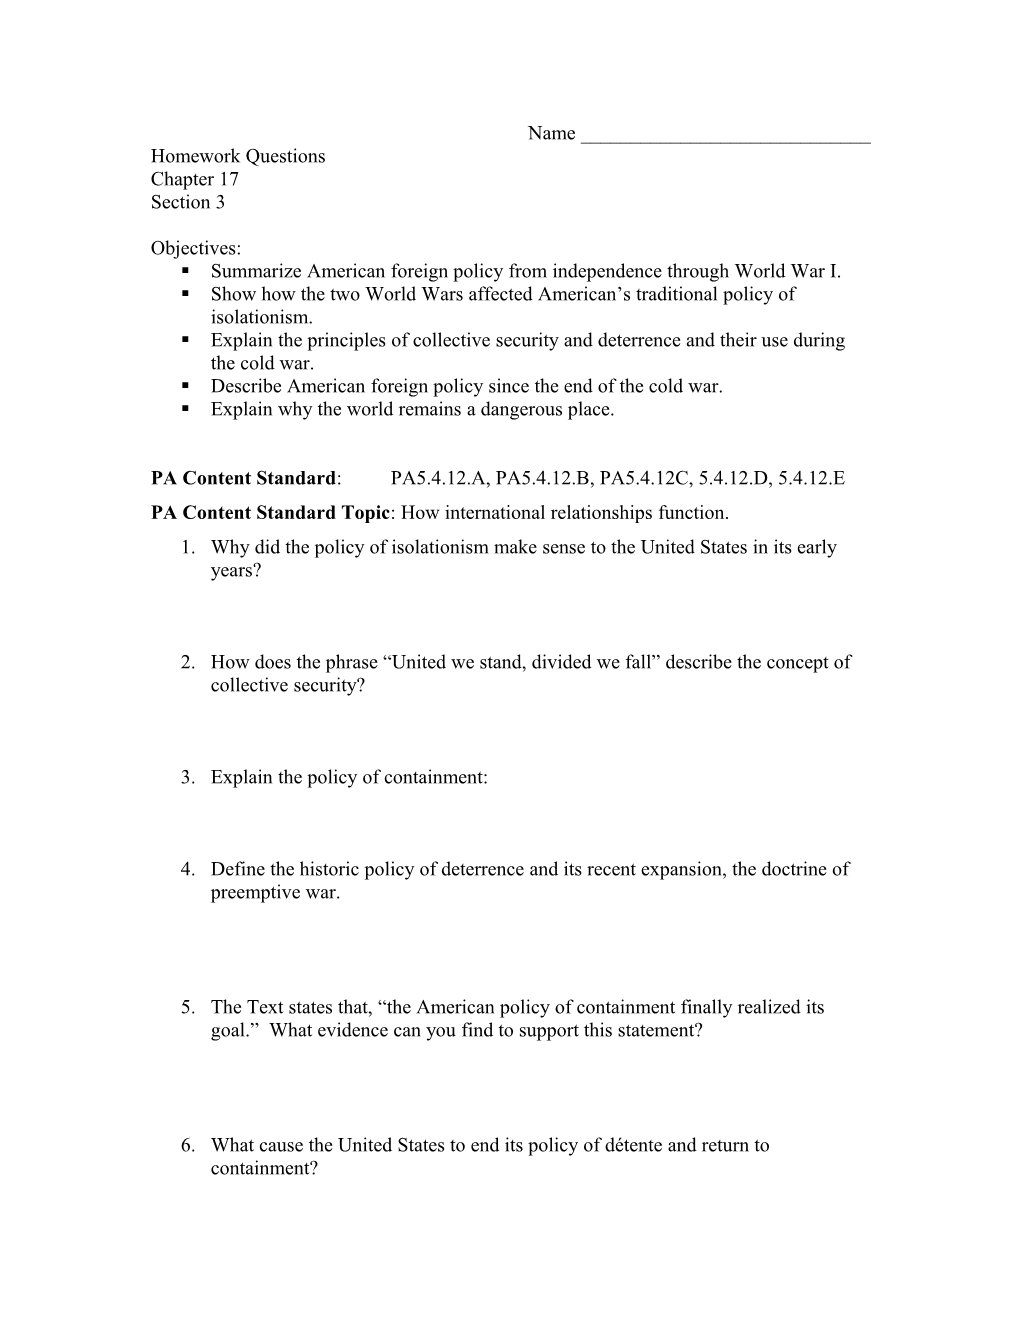 Homework Questions Chapter 17 Section 4